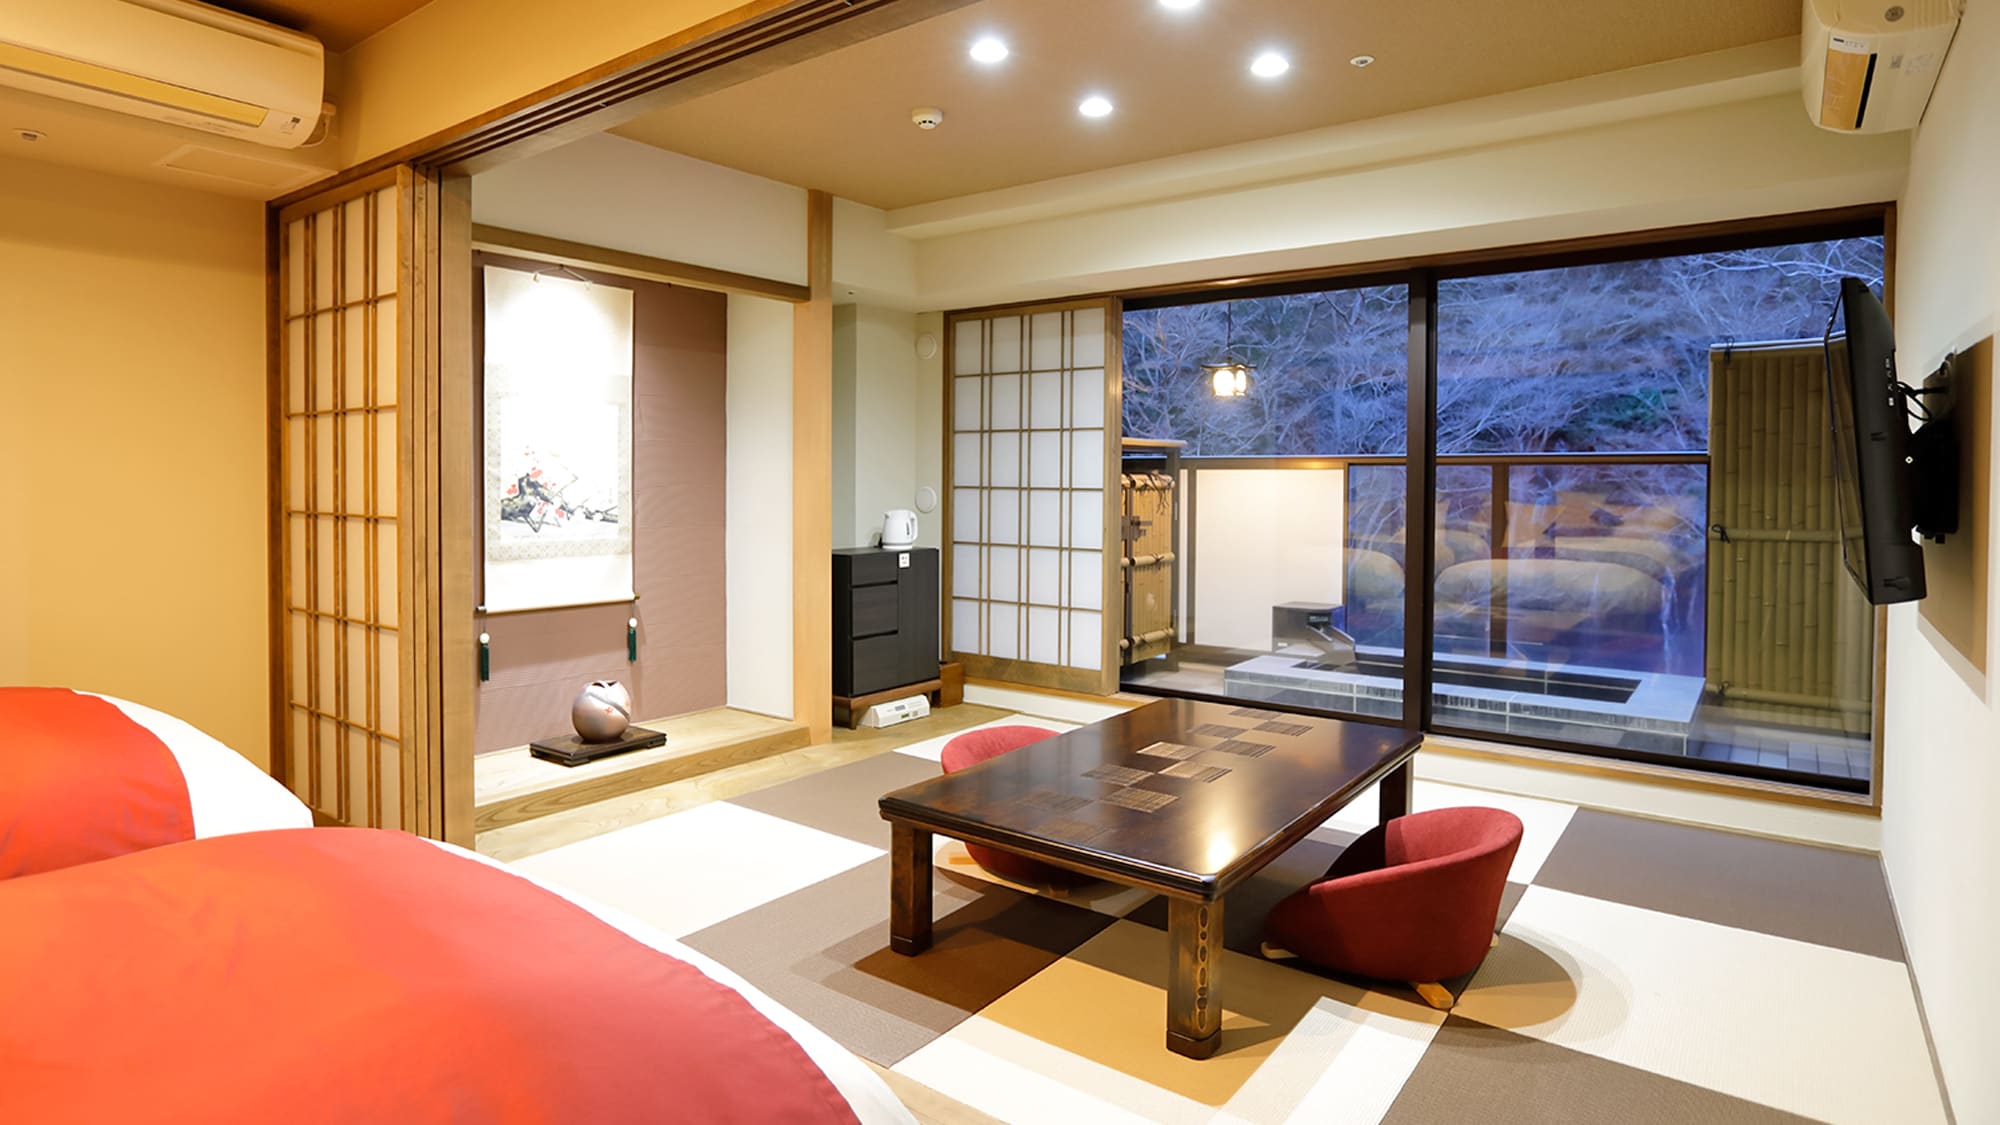 A Japanese-Western style room with a modern Japanese-style open-air bath that combines a Japanese-style room and a bedroom where you can relax.